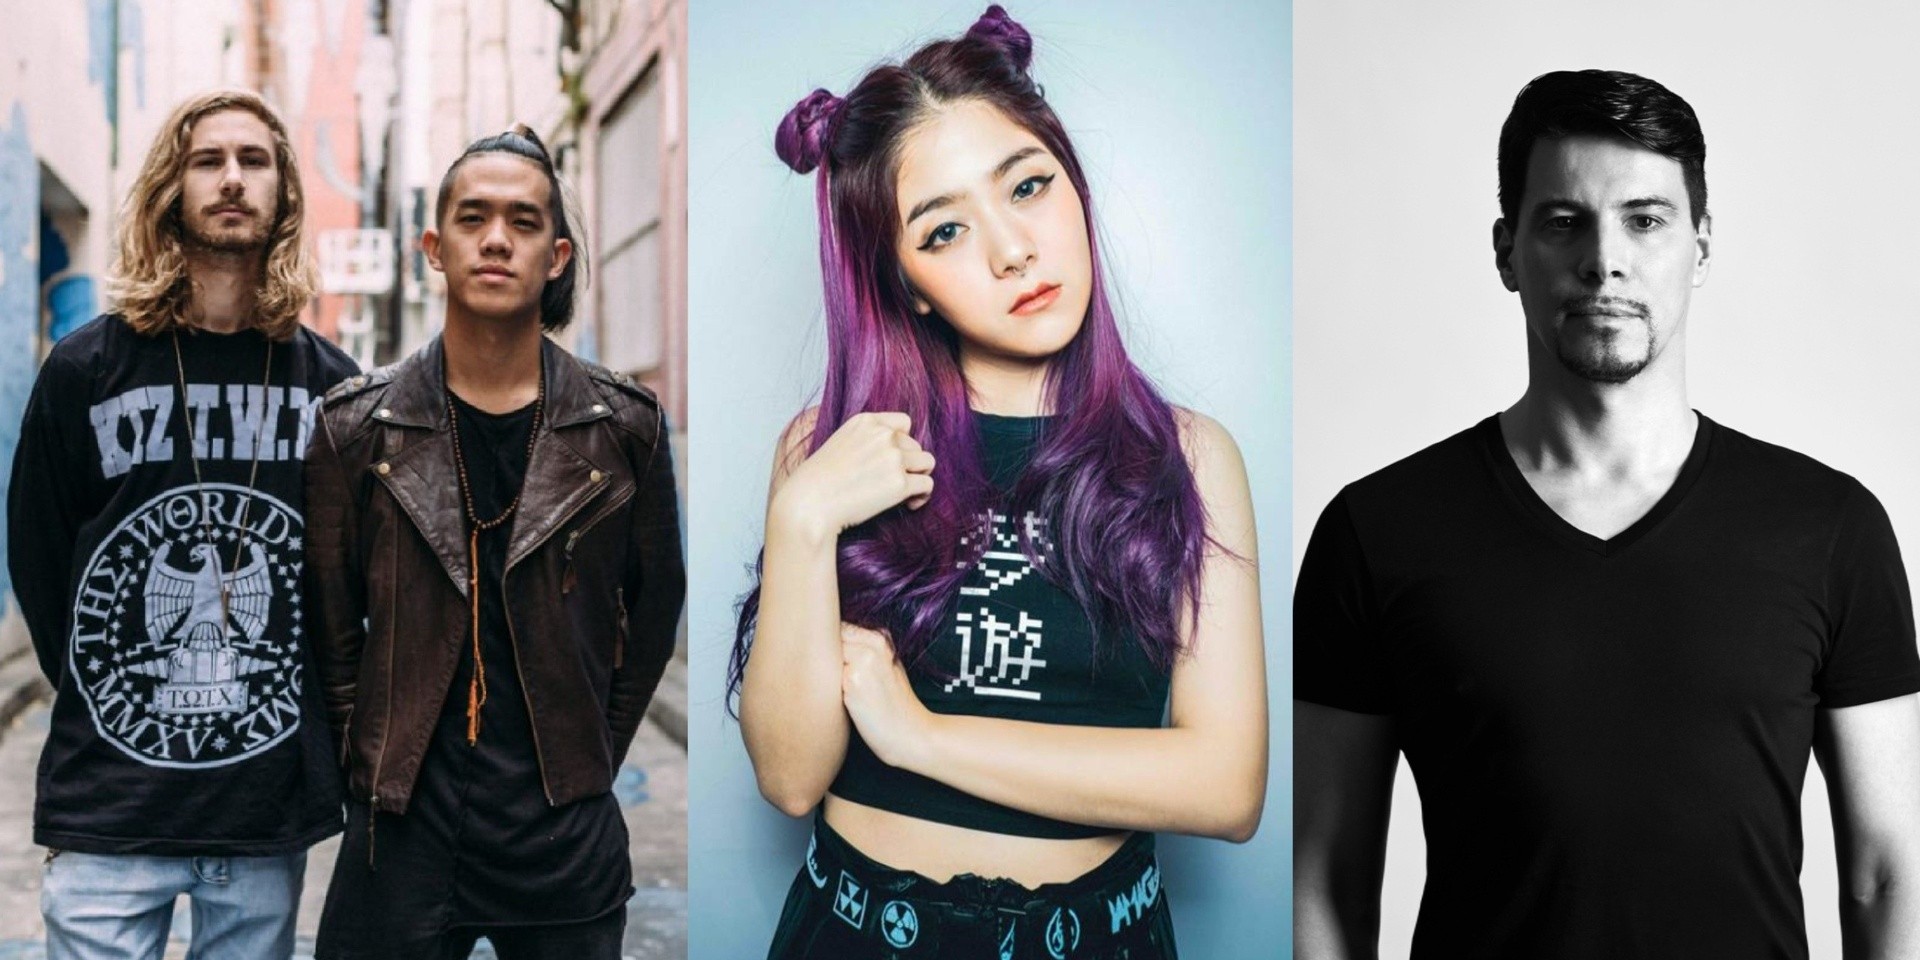 Wired Music Week to hold inaugural dance music convention this May in Kuala Lumpur